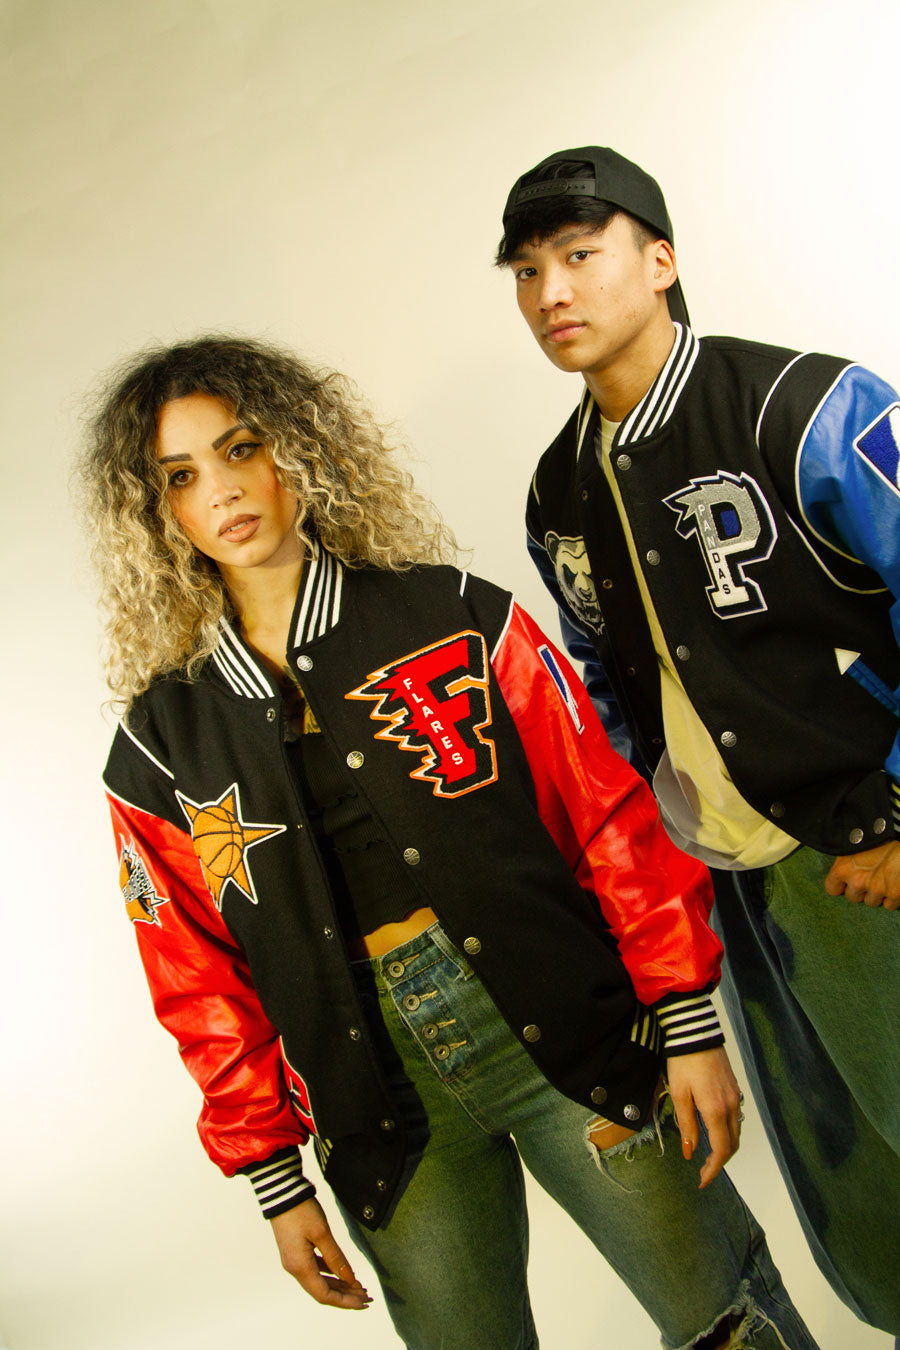 atypical pandas and the playoffs flares mvp varsity jackets, blue colorway for the pandas and red for the flares